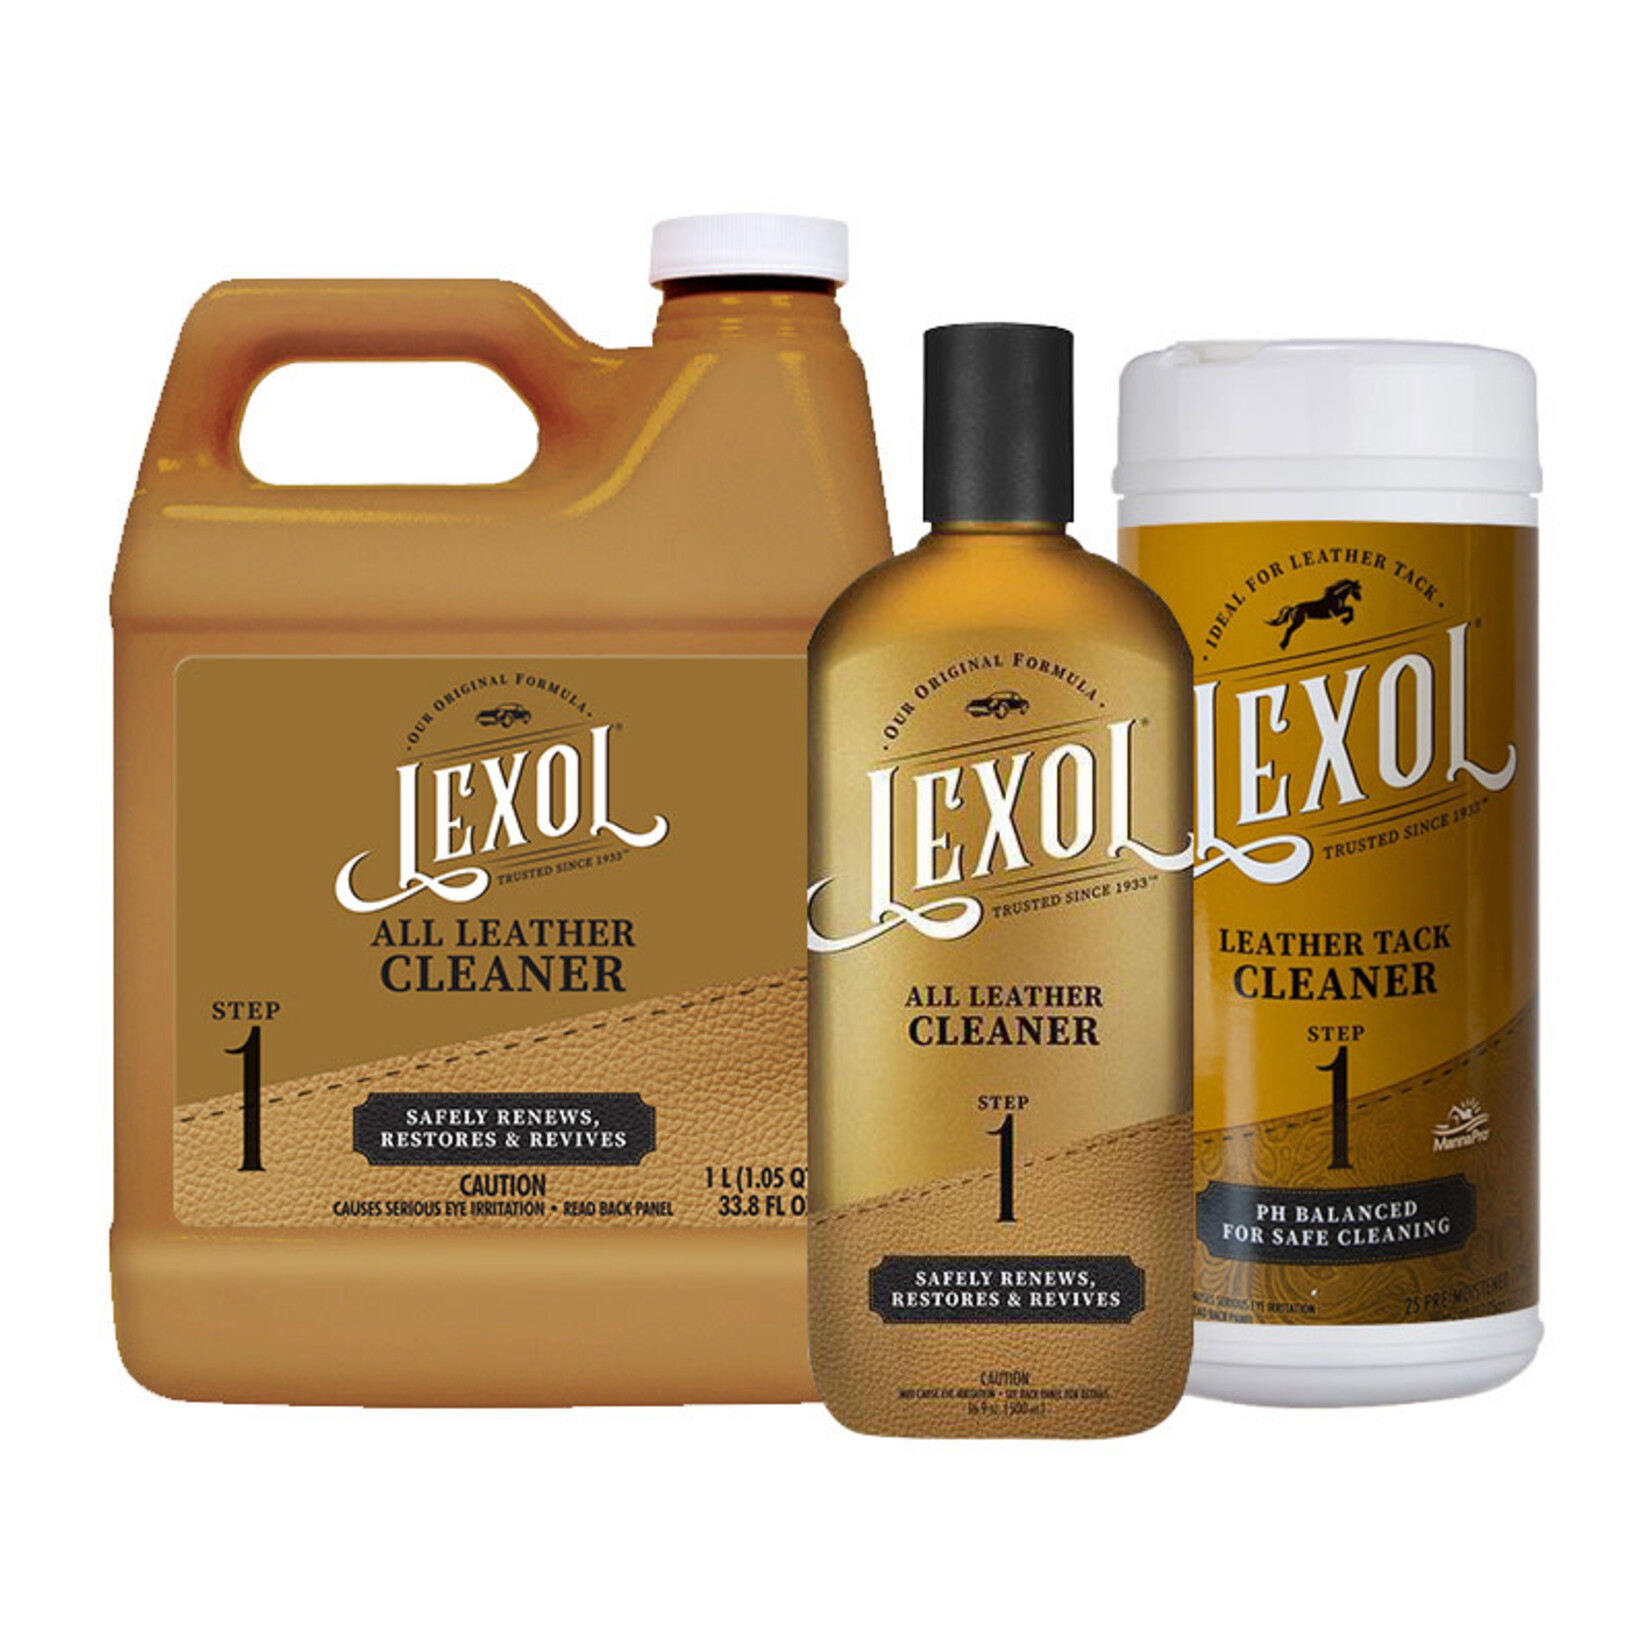 Lexol p-H Balanced All Leather Cleaner 25s